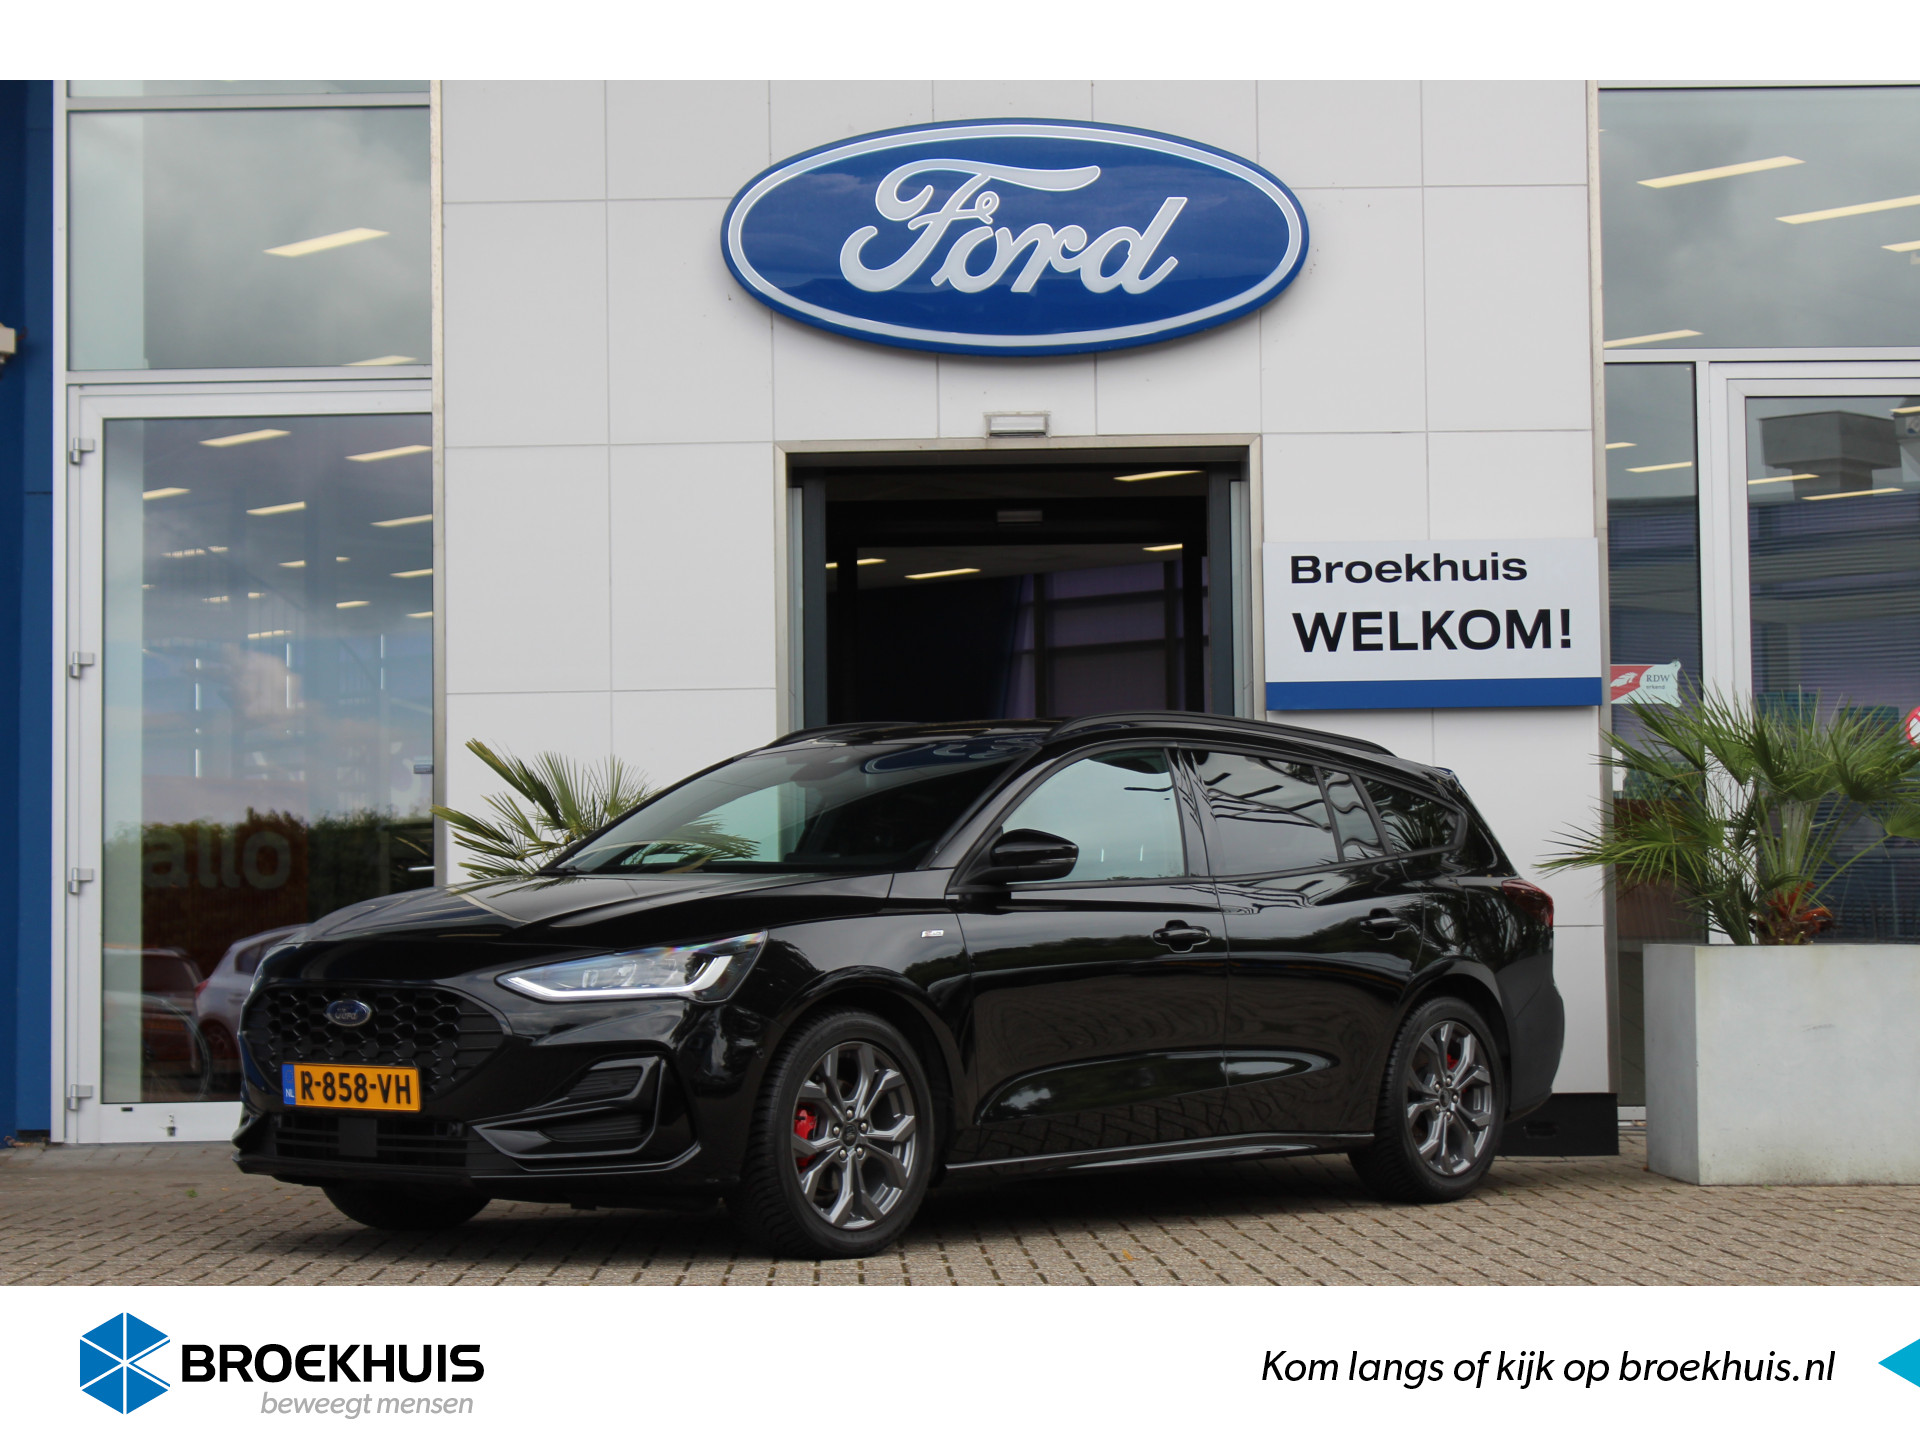 Ford Focus Wagon 1.0 EcoBoost 125pk Hybrid ST Line Style | CAMERA | 17" LICHTMETAAL | PRIVACY GLASS | NAVIGATIE | WINTER PACK | CLIMATE CON bij viaBOVAG.nl